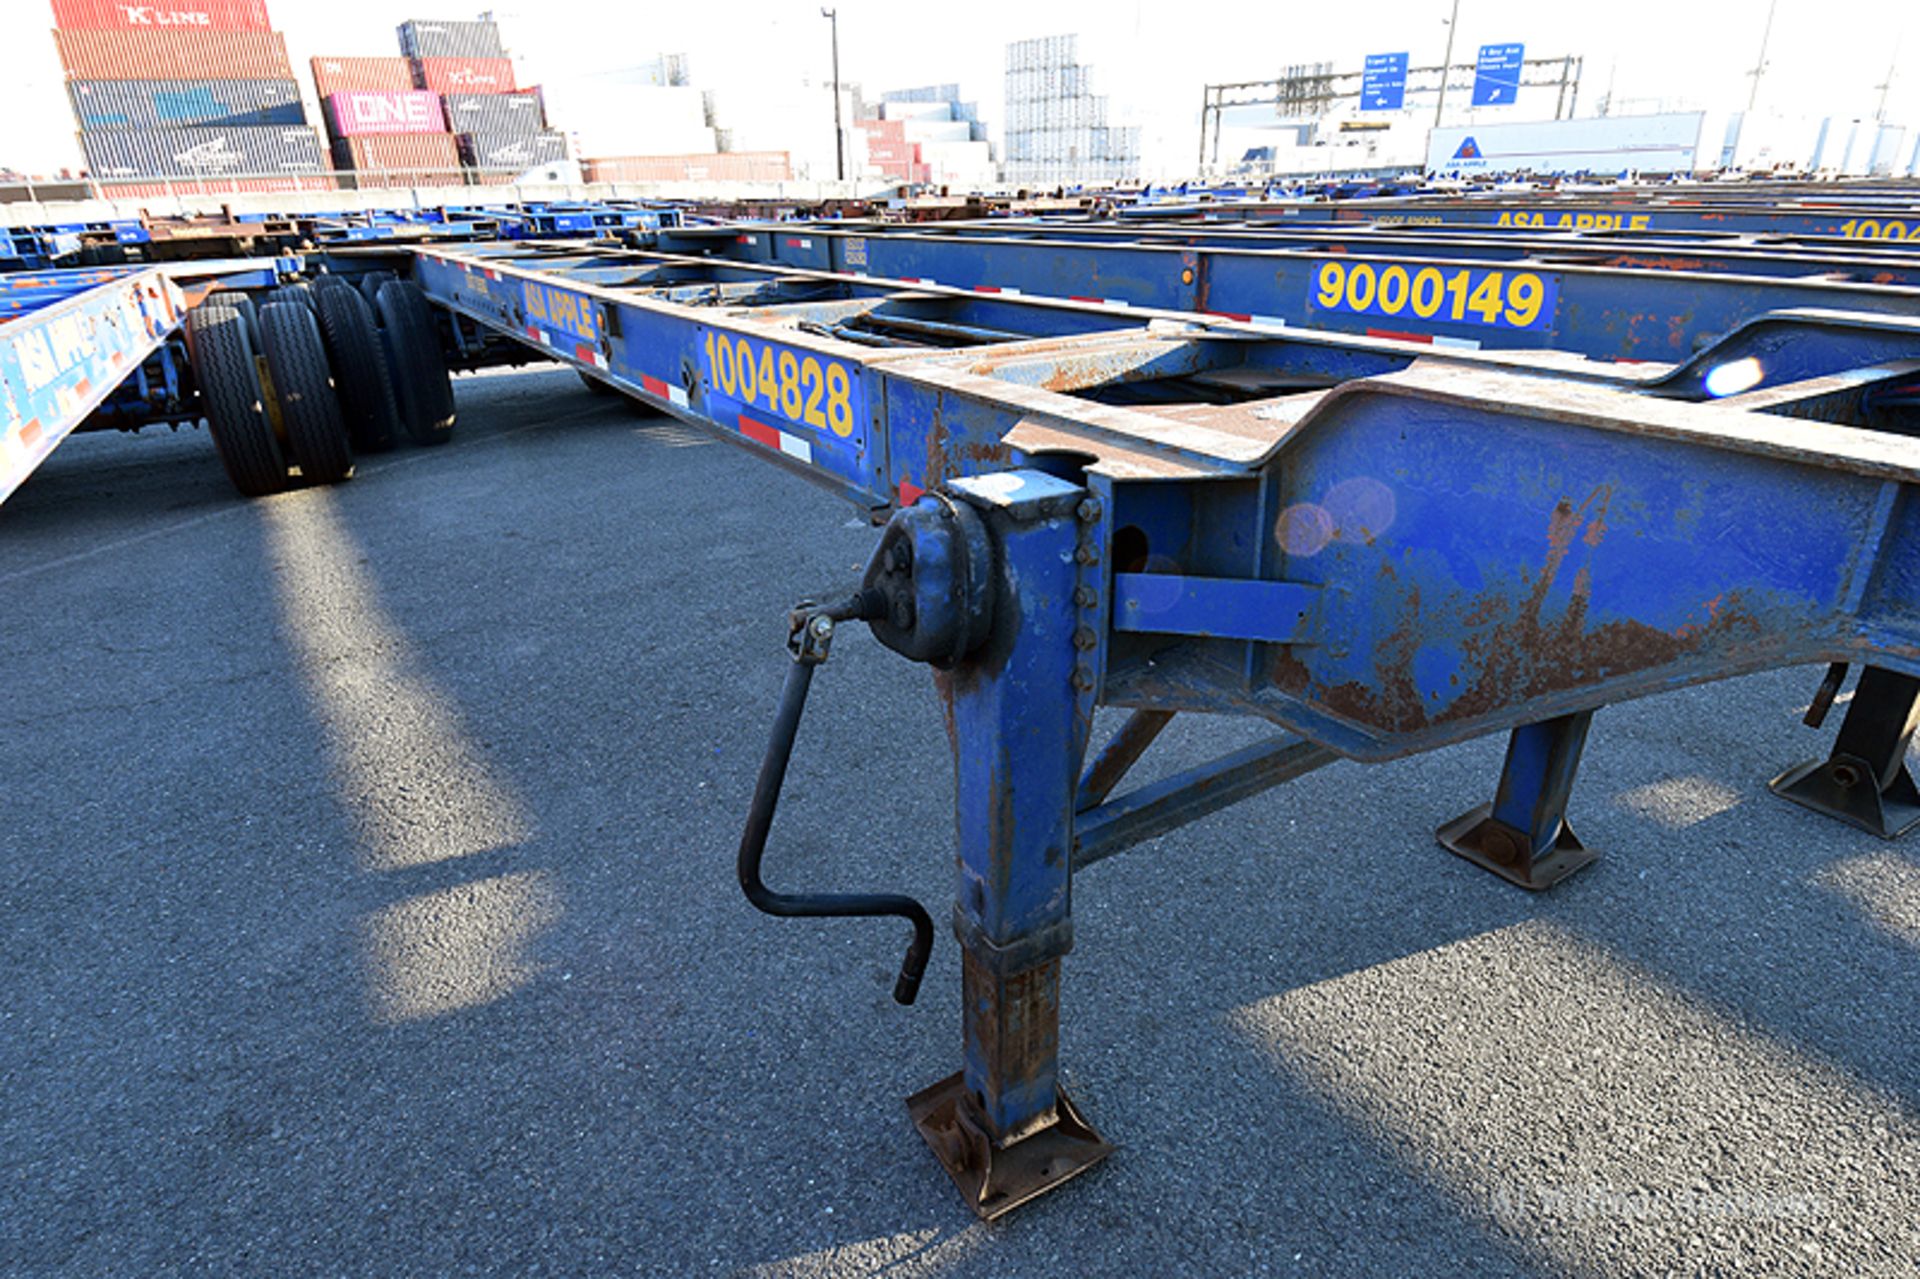 1995 Monon 40' to 48'-0 gooseneck slider container chassis VIN 1NNC04822SM247169 (Unit #1004828) - Image 2 of 5